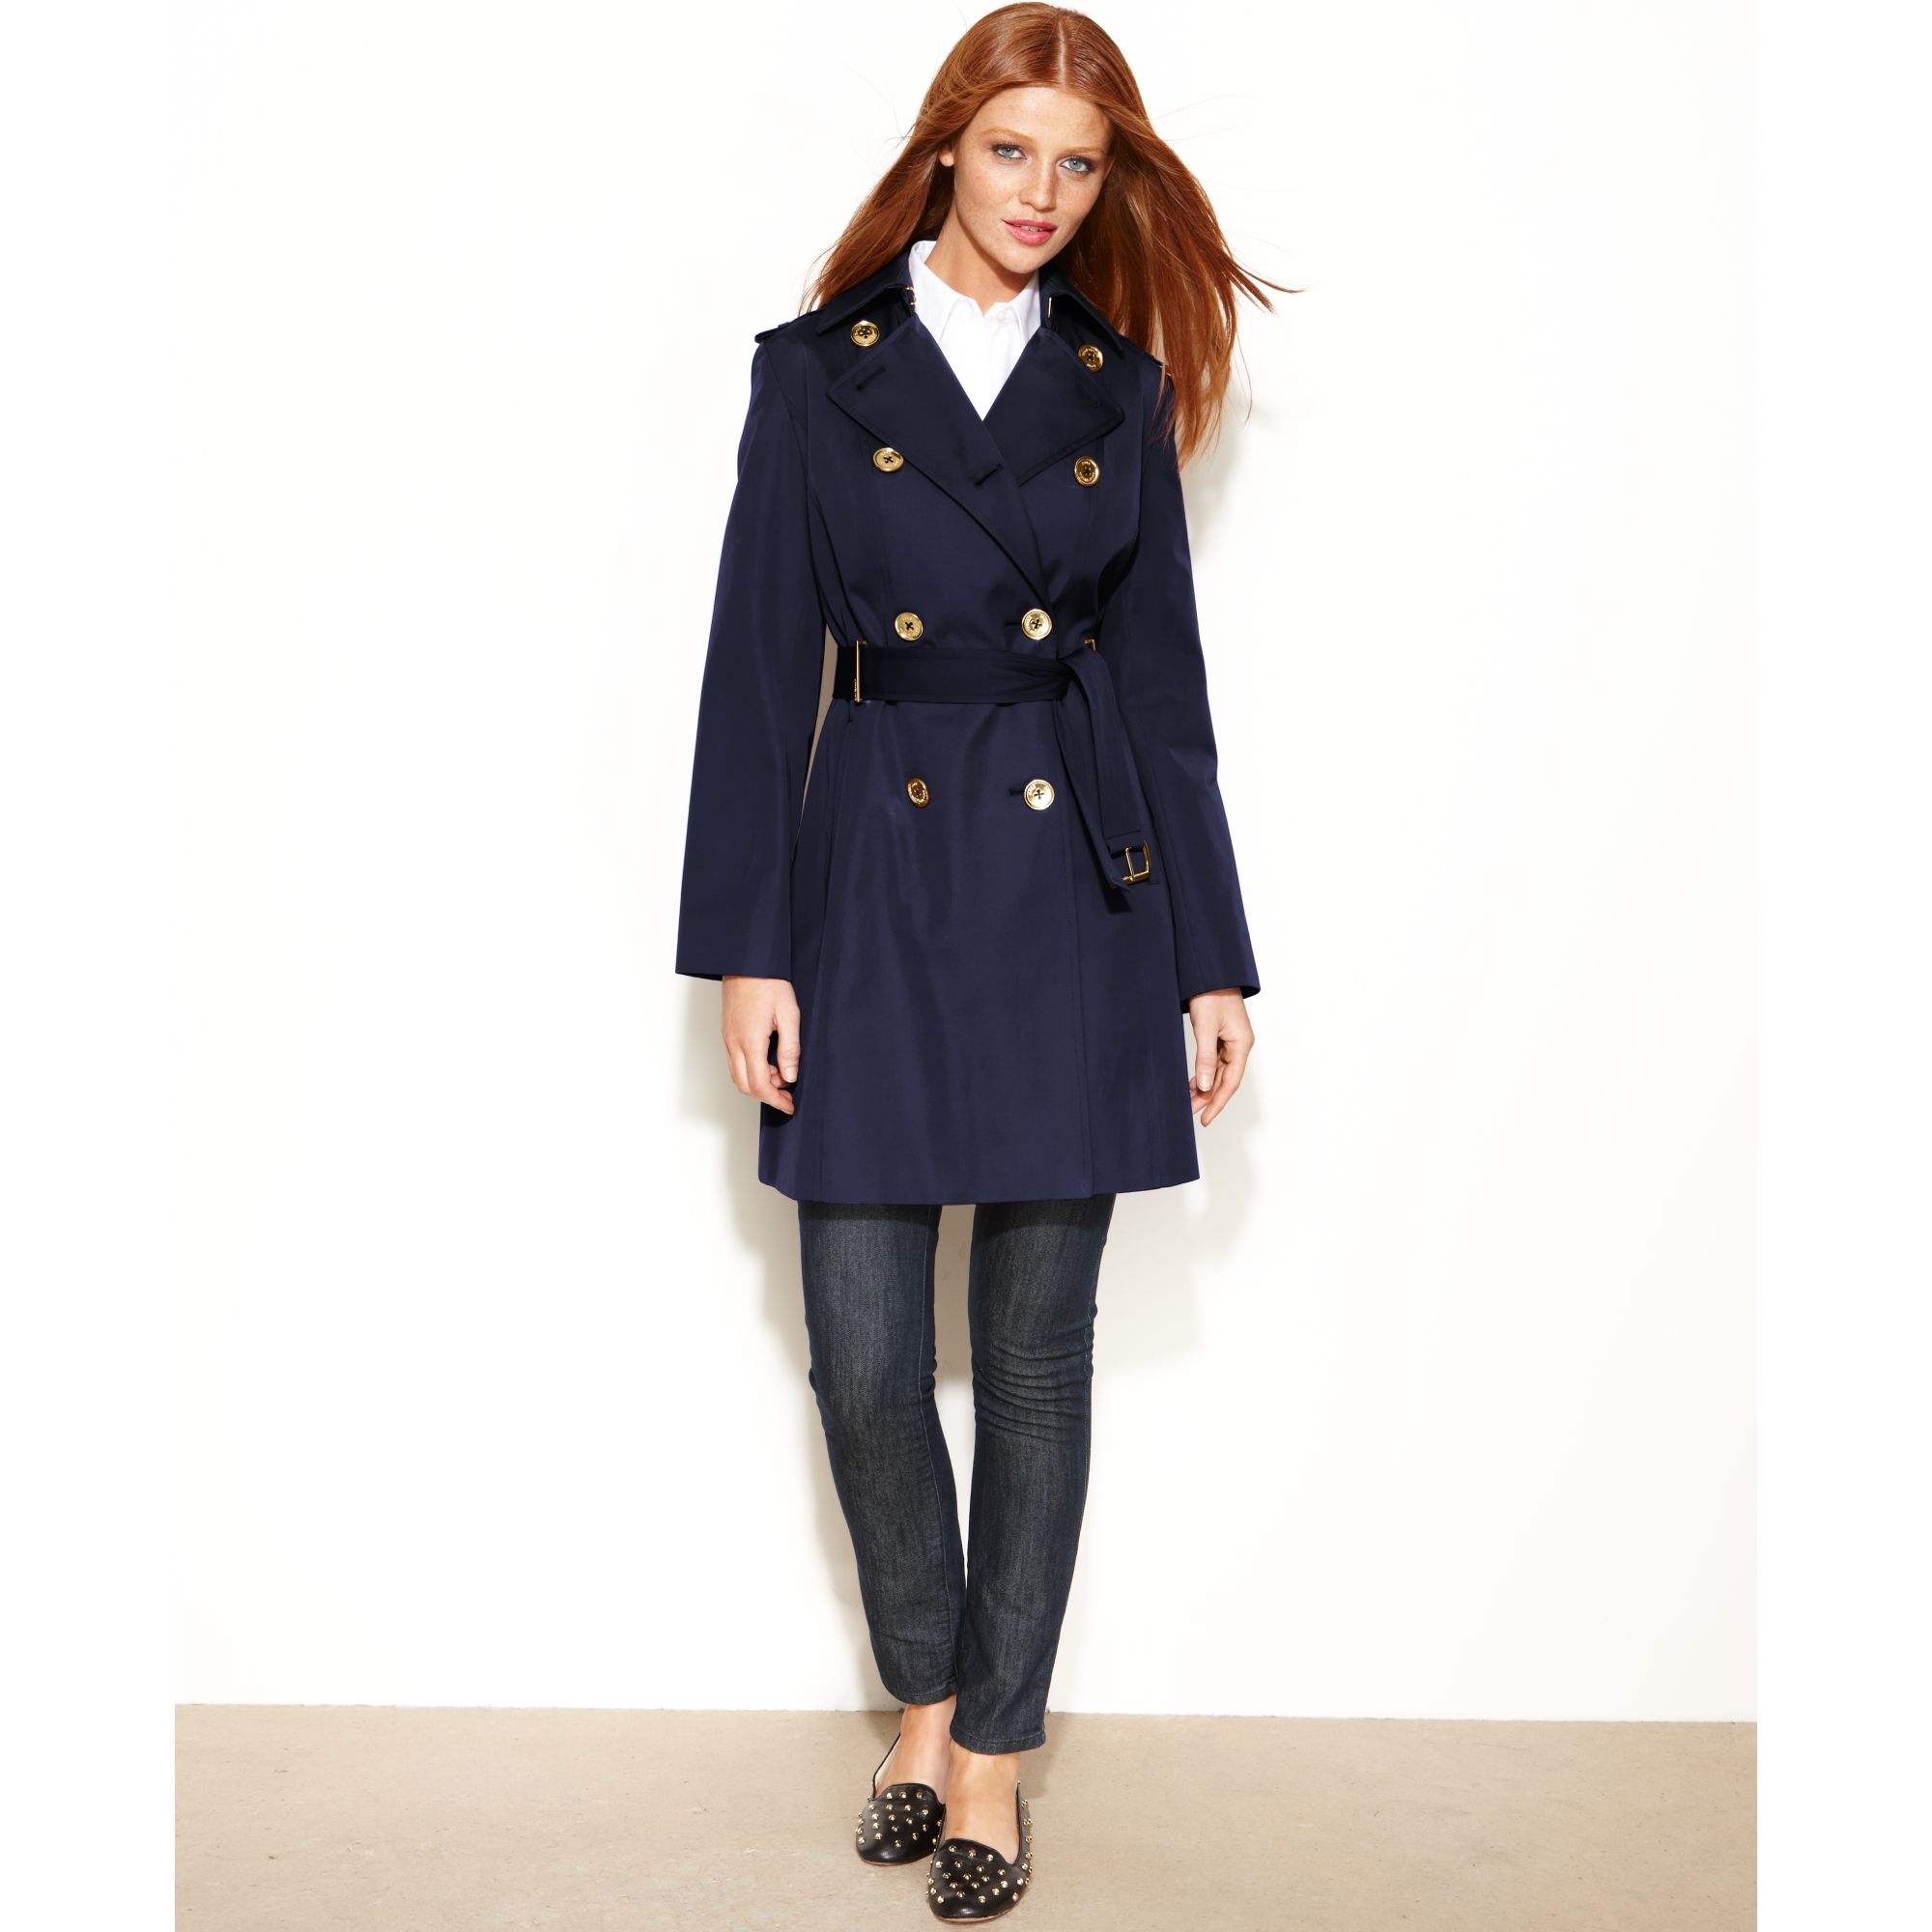 Michael Kors Doublebreasted Belted Trench Coat in Navy (Blue) - Lyst